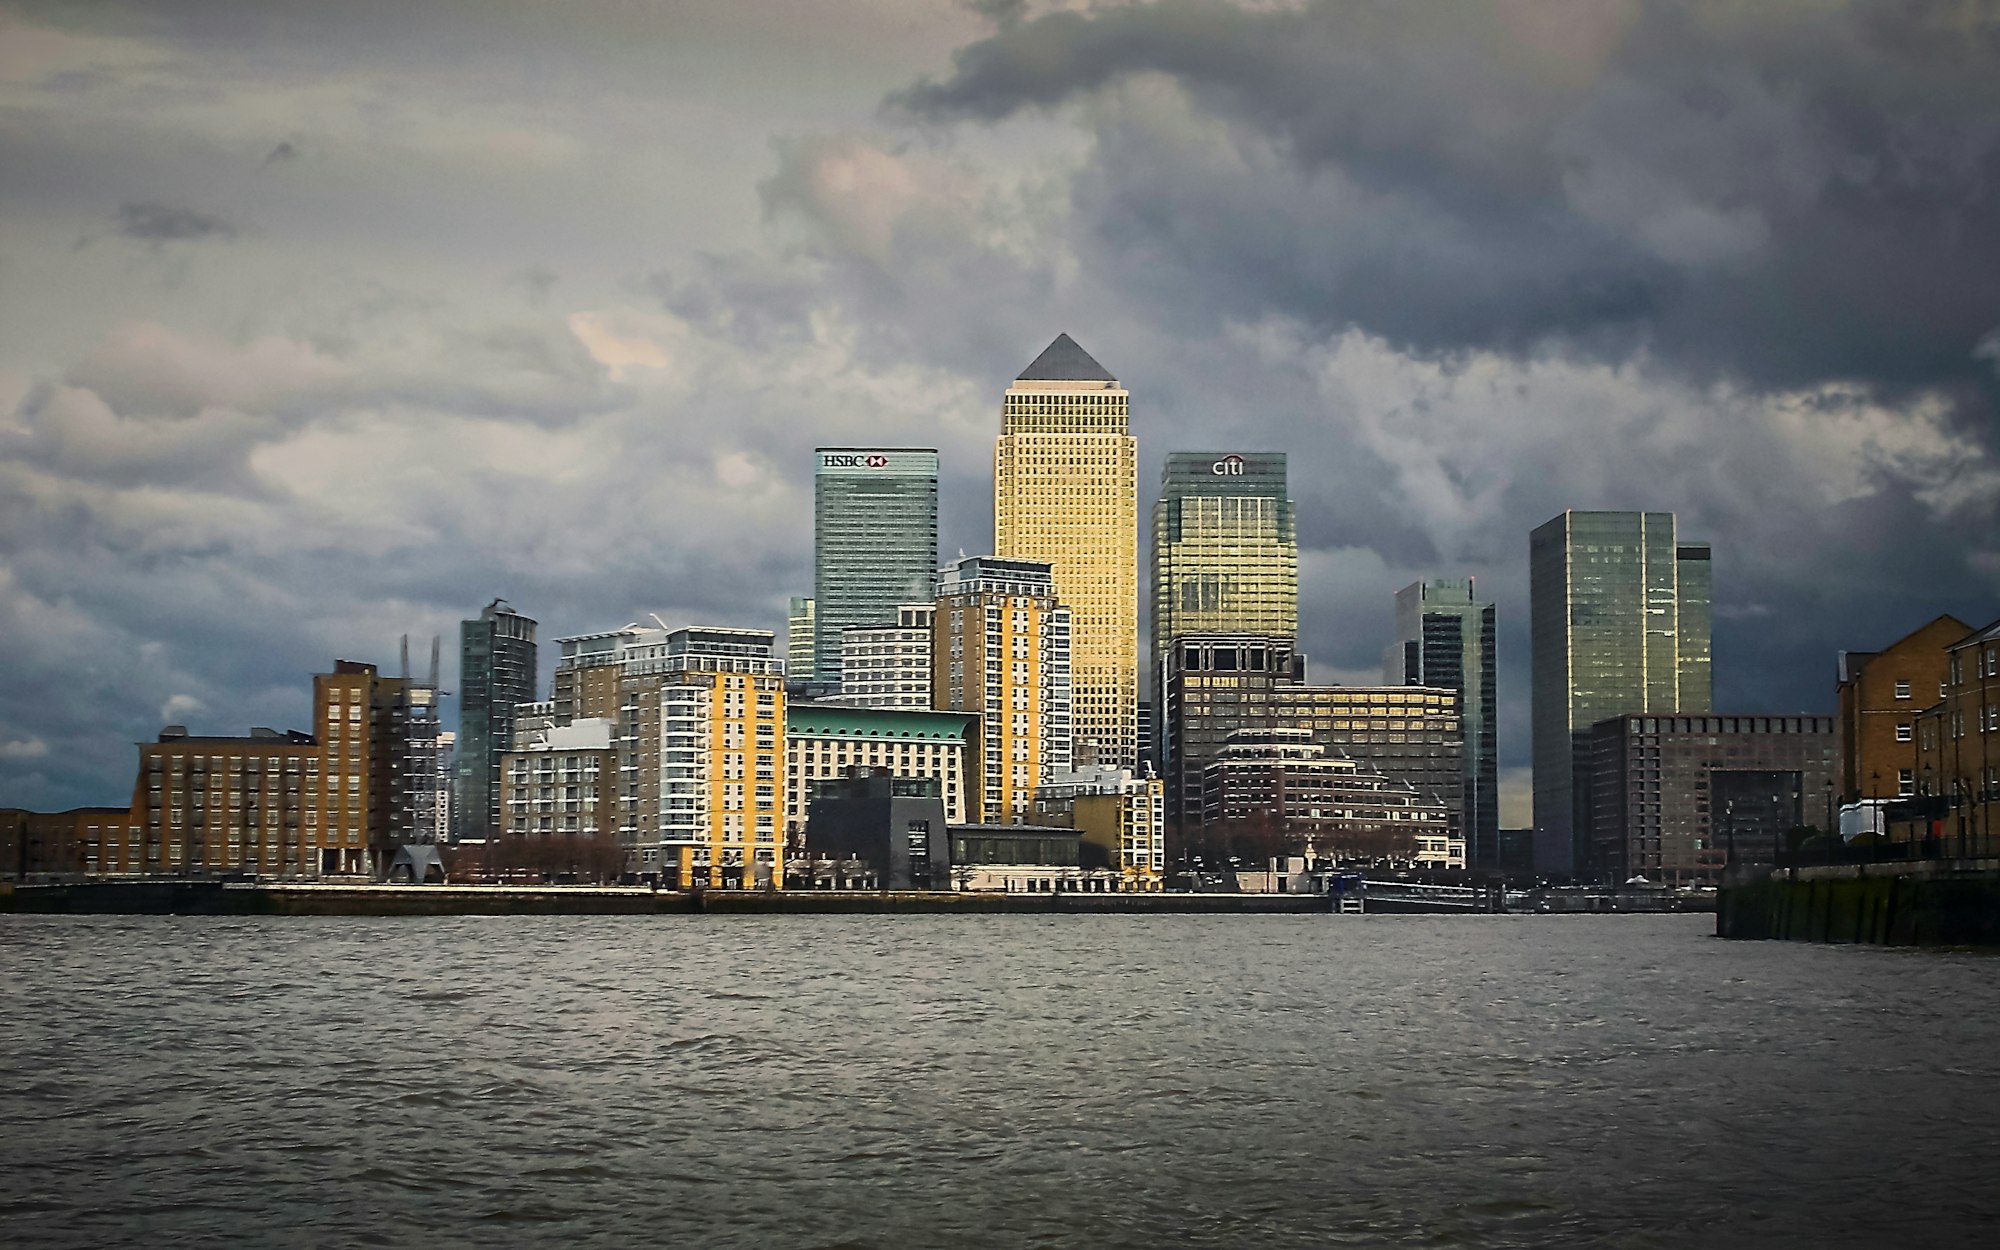 Canary Wharf, London, during a winter storm (Jan., 2015).